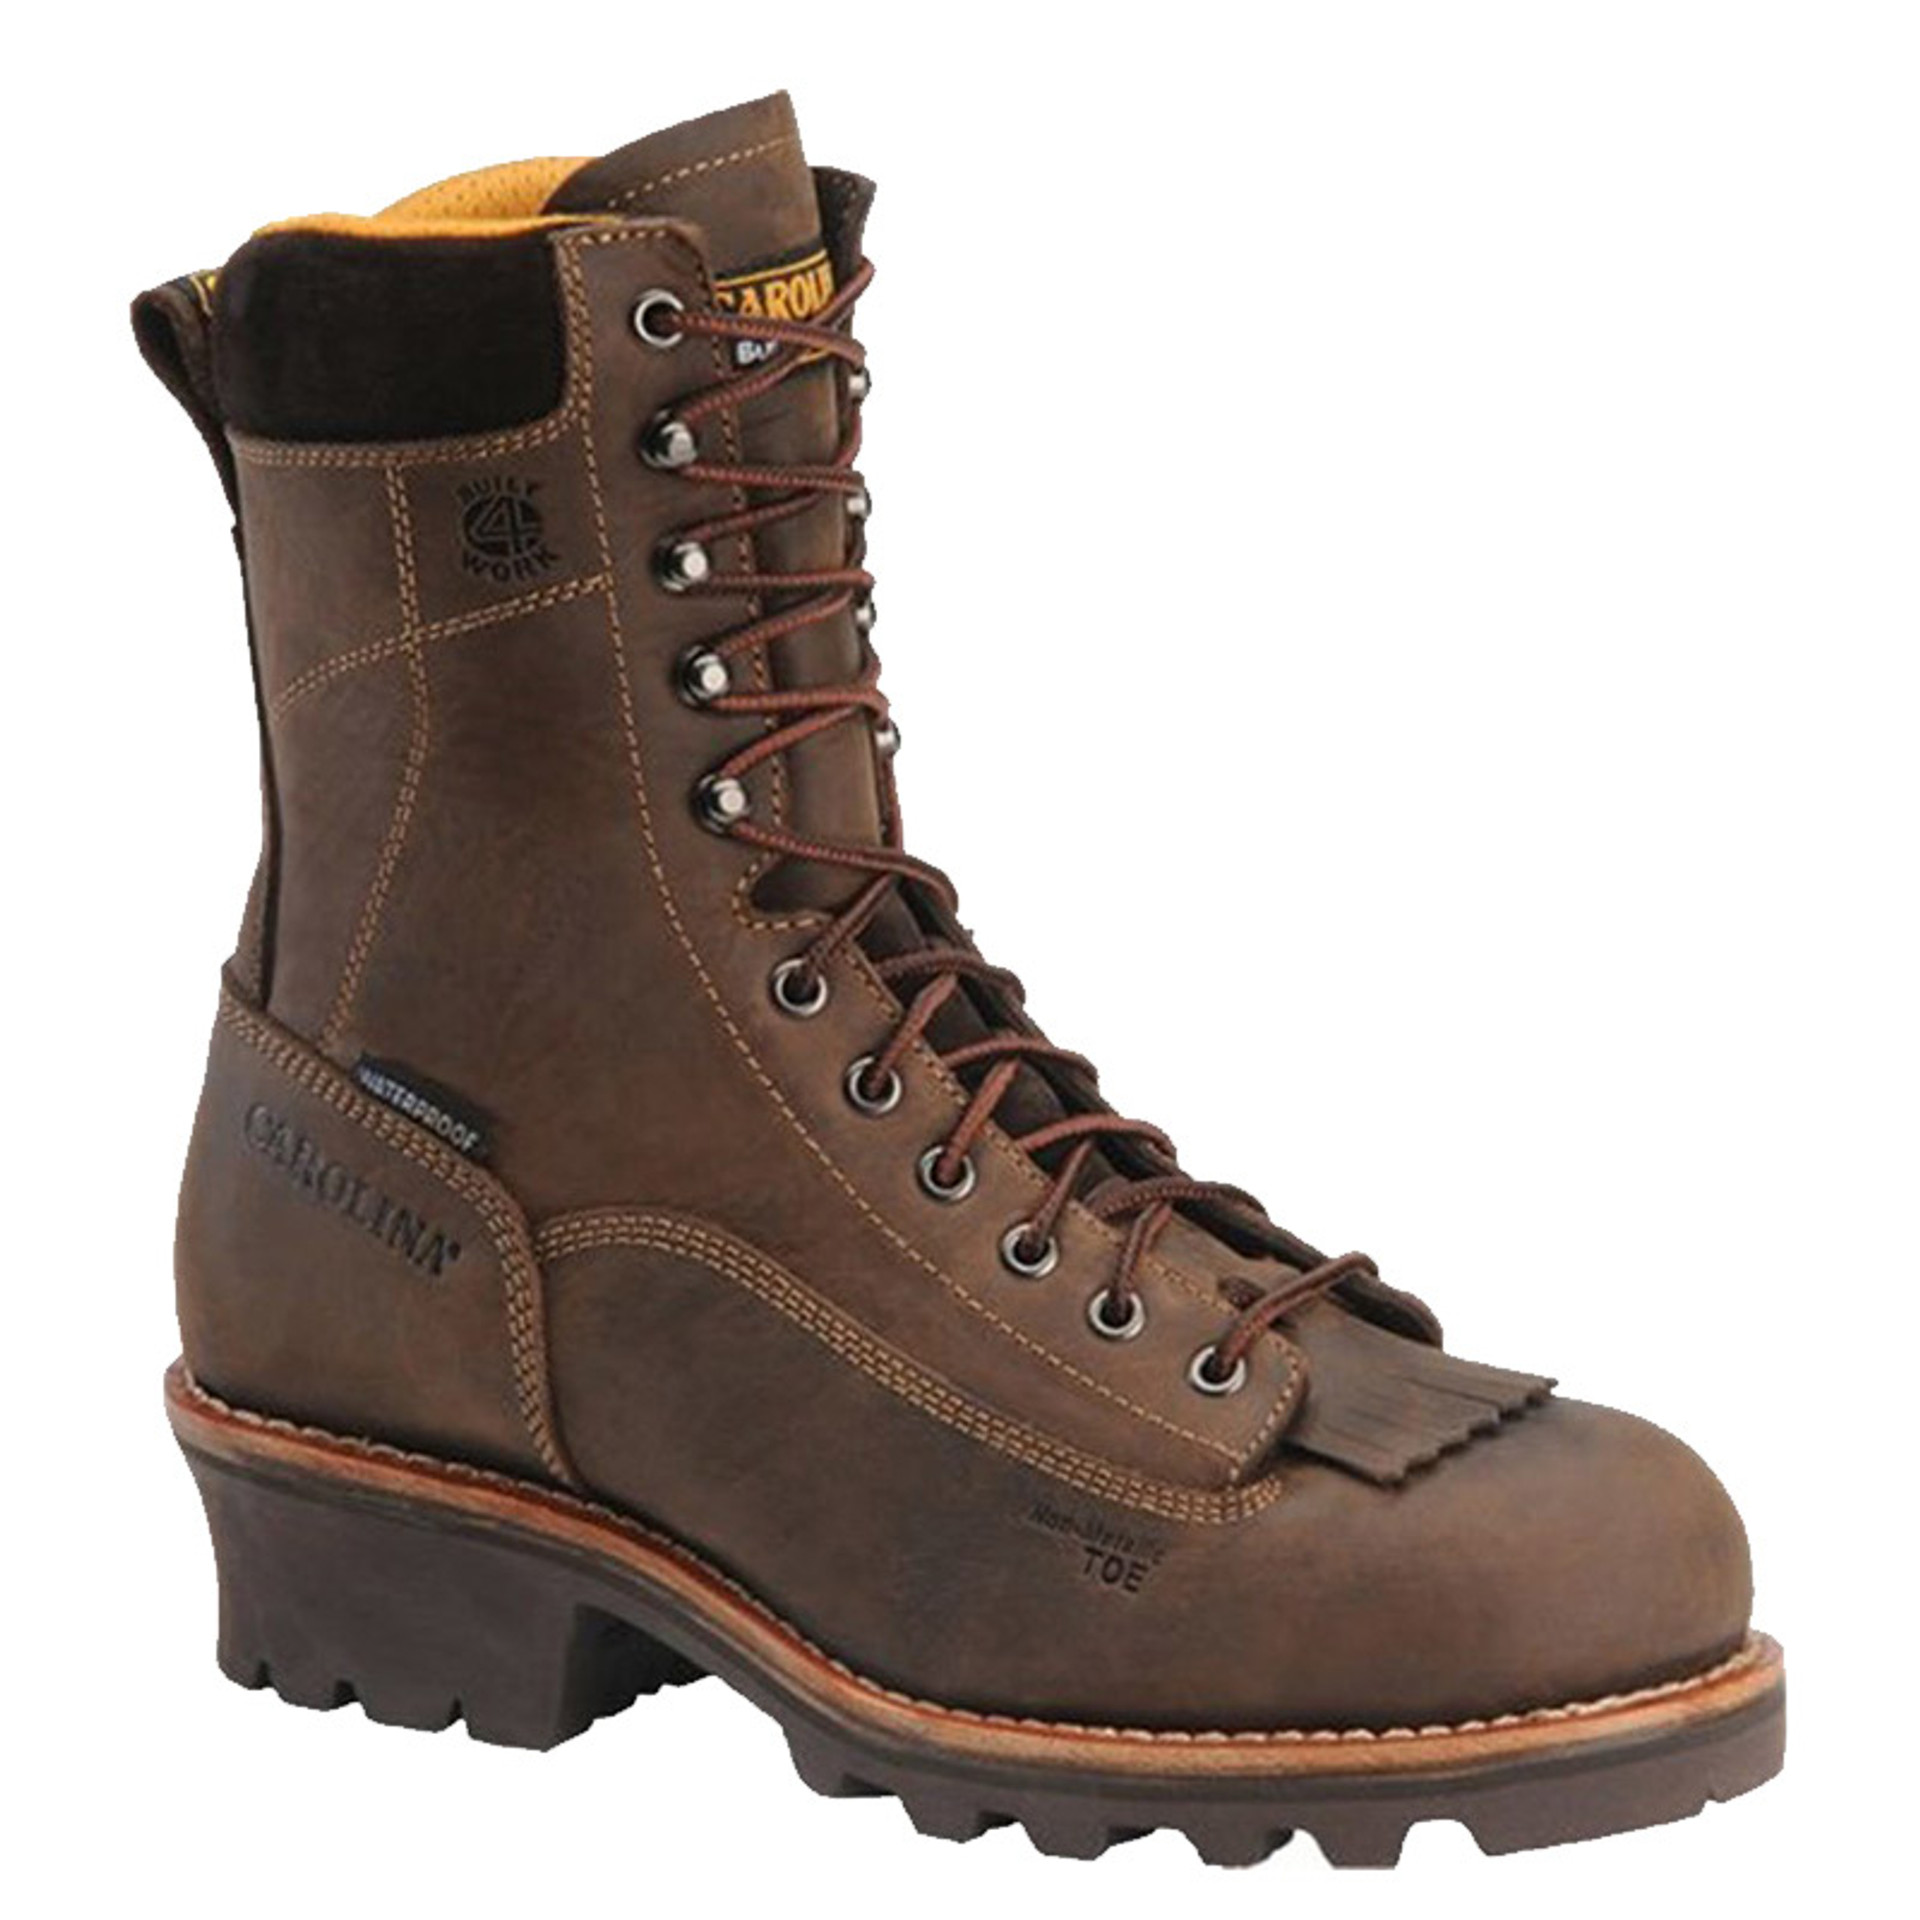 Carolina Boots -Best MADE IN THE USA Work Boots